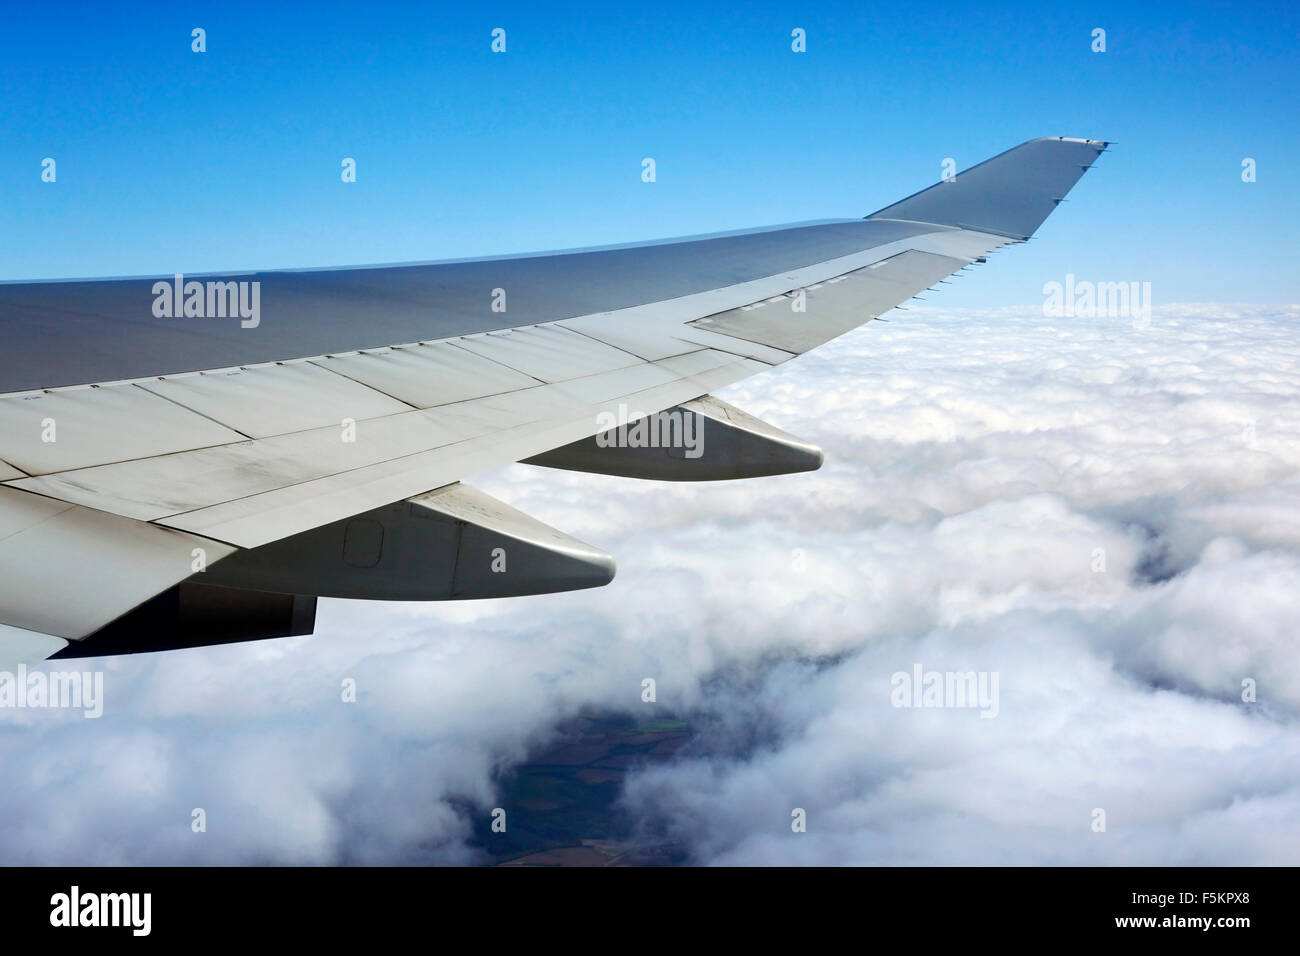 Wing of the plane on a background of clouds Stock Photo